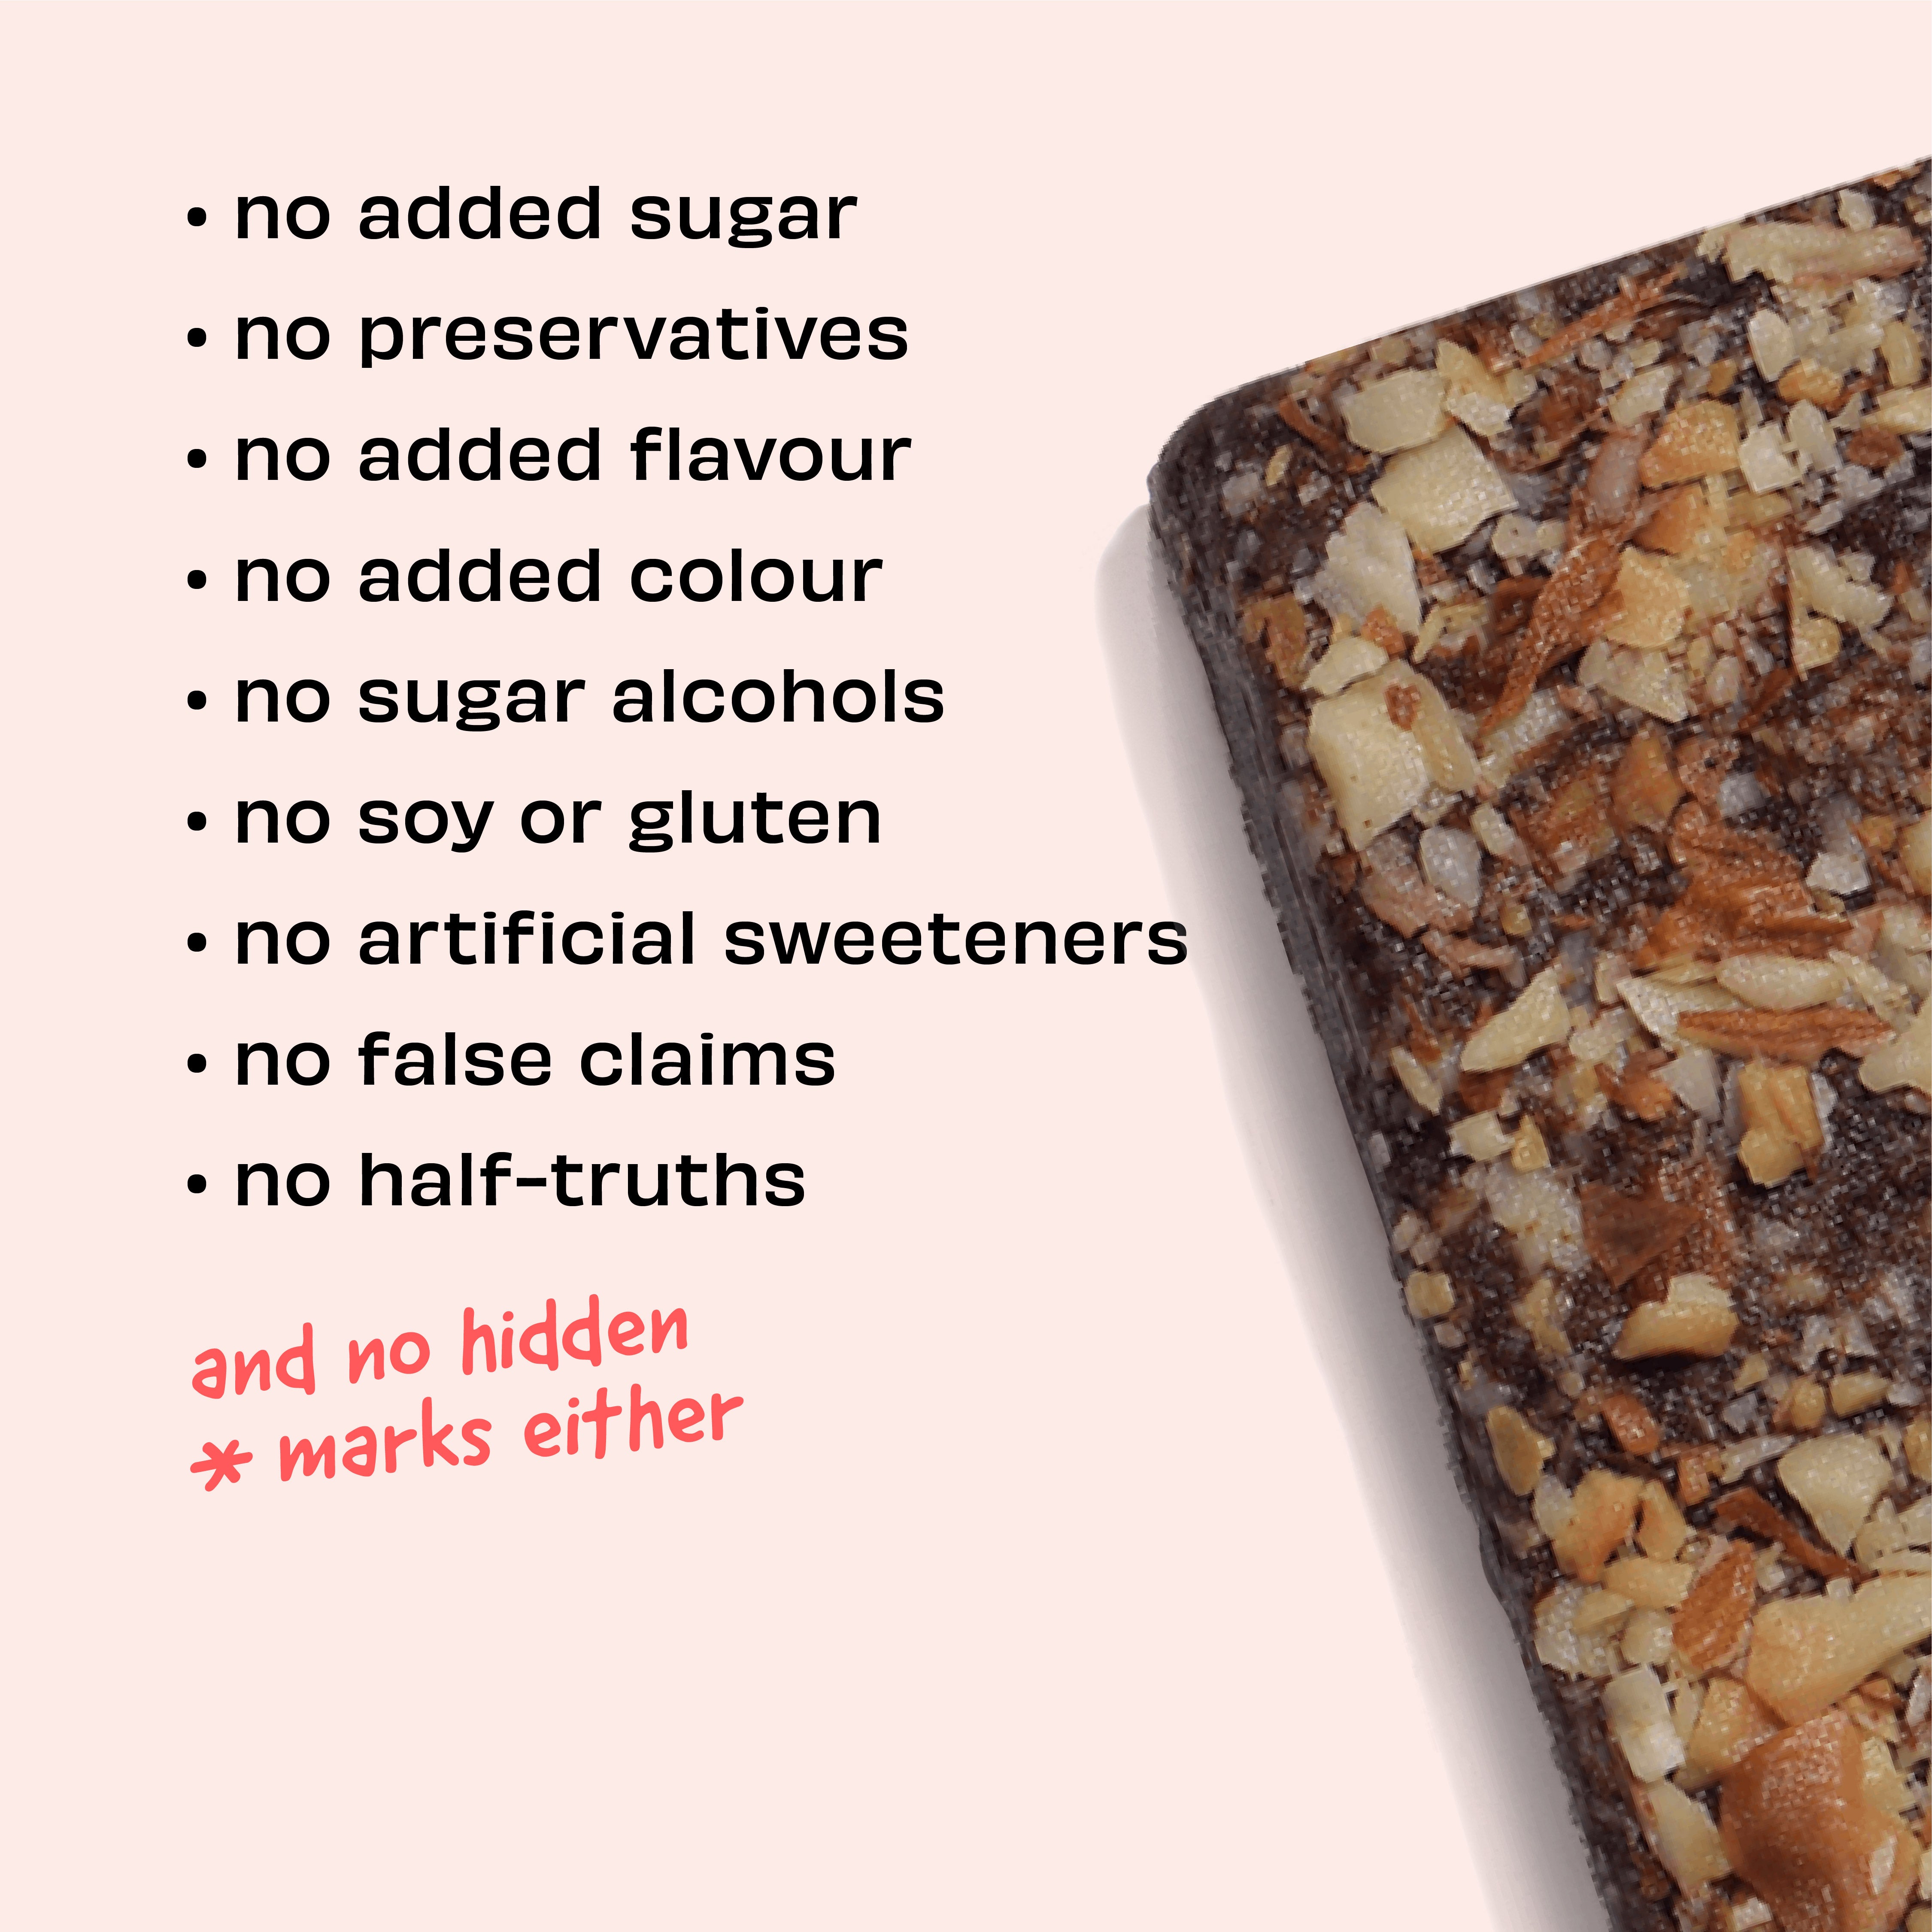 The Whole Truth - Energy Bars | Mocha Almond Fudge | Pack of 6 x 40g | Dairy Free & Sugarfree | No Artificial Sweeteners | Vegan | No Preservatives | All Natural | Healthy Snack